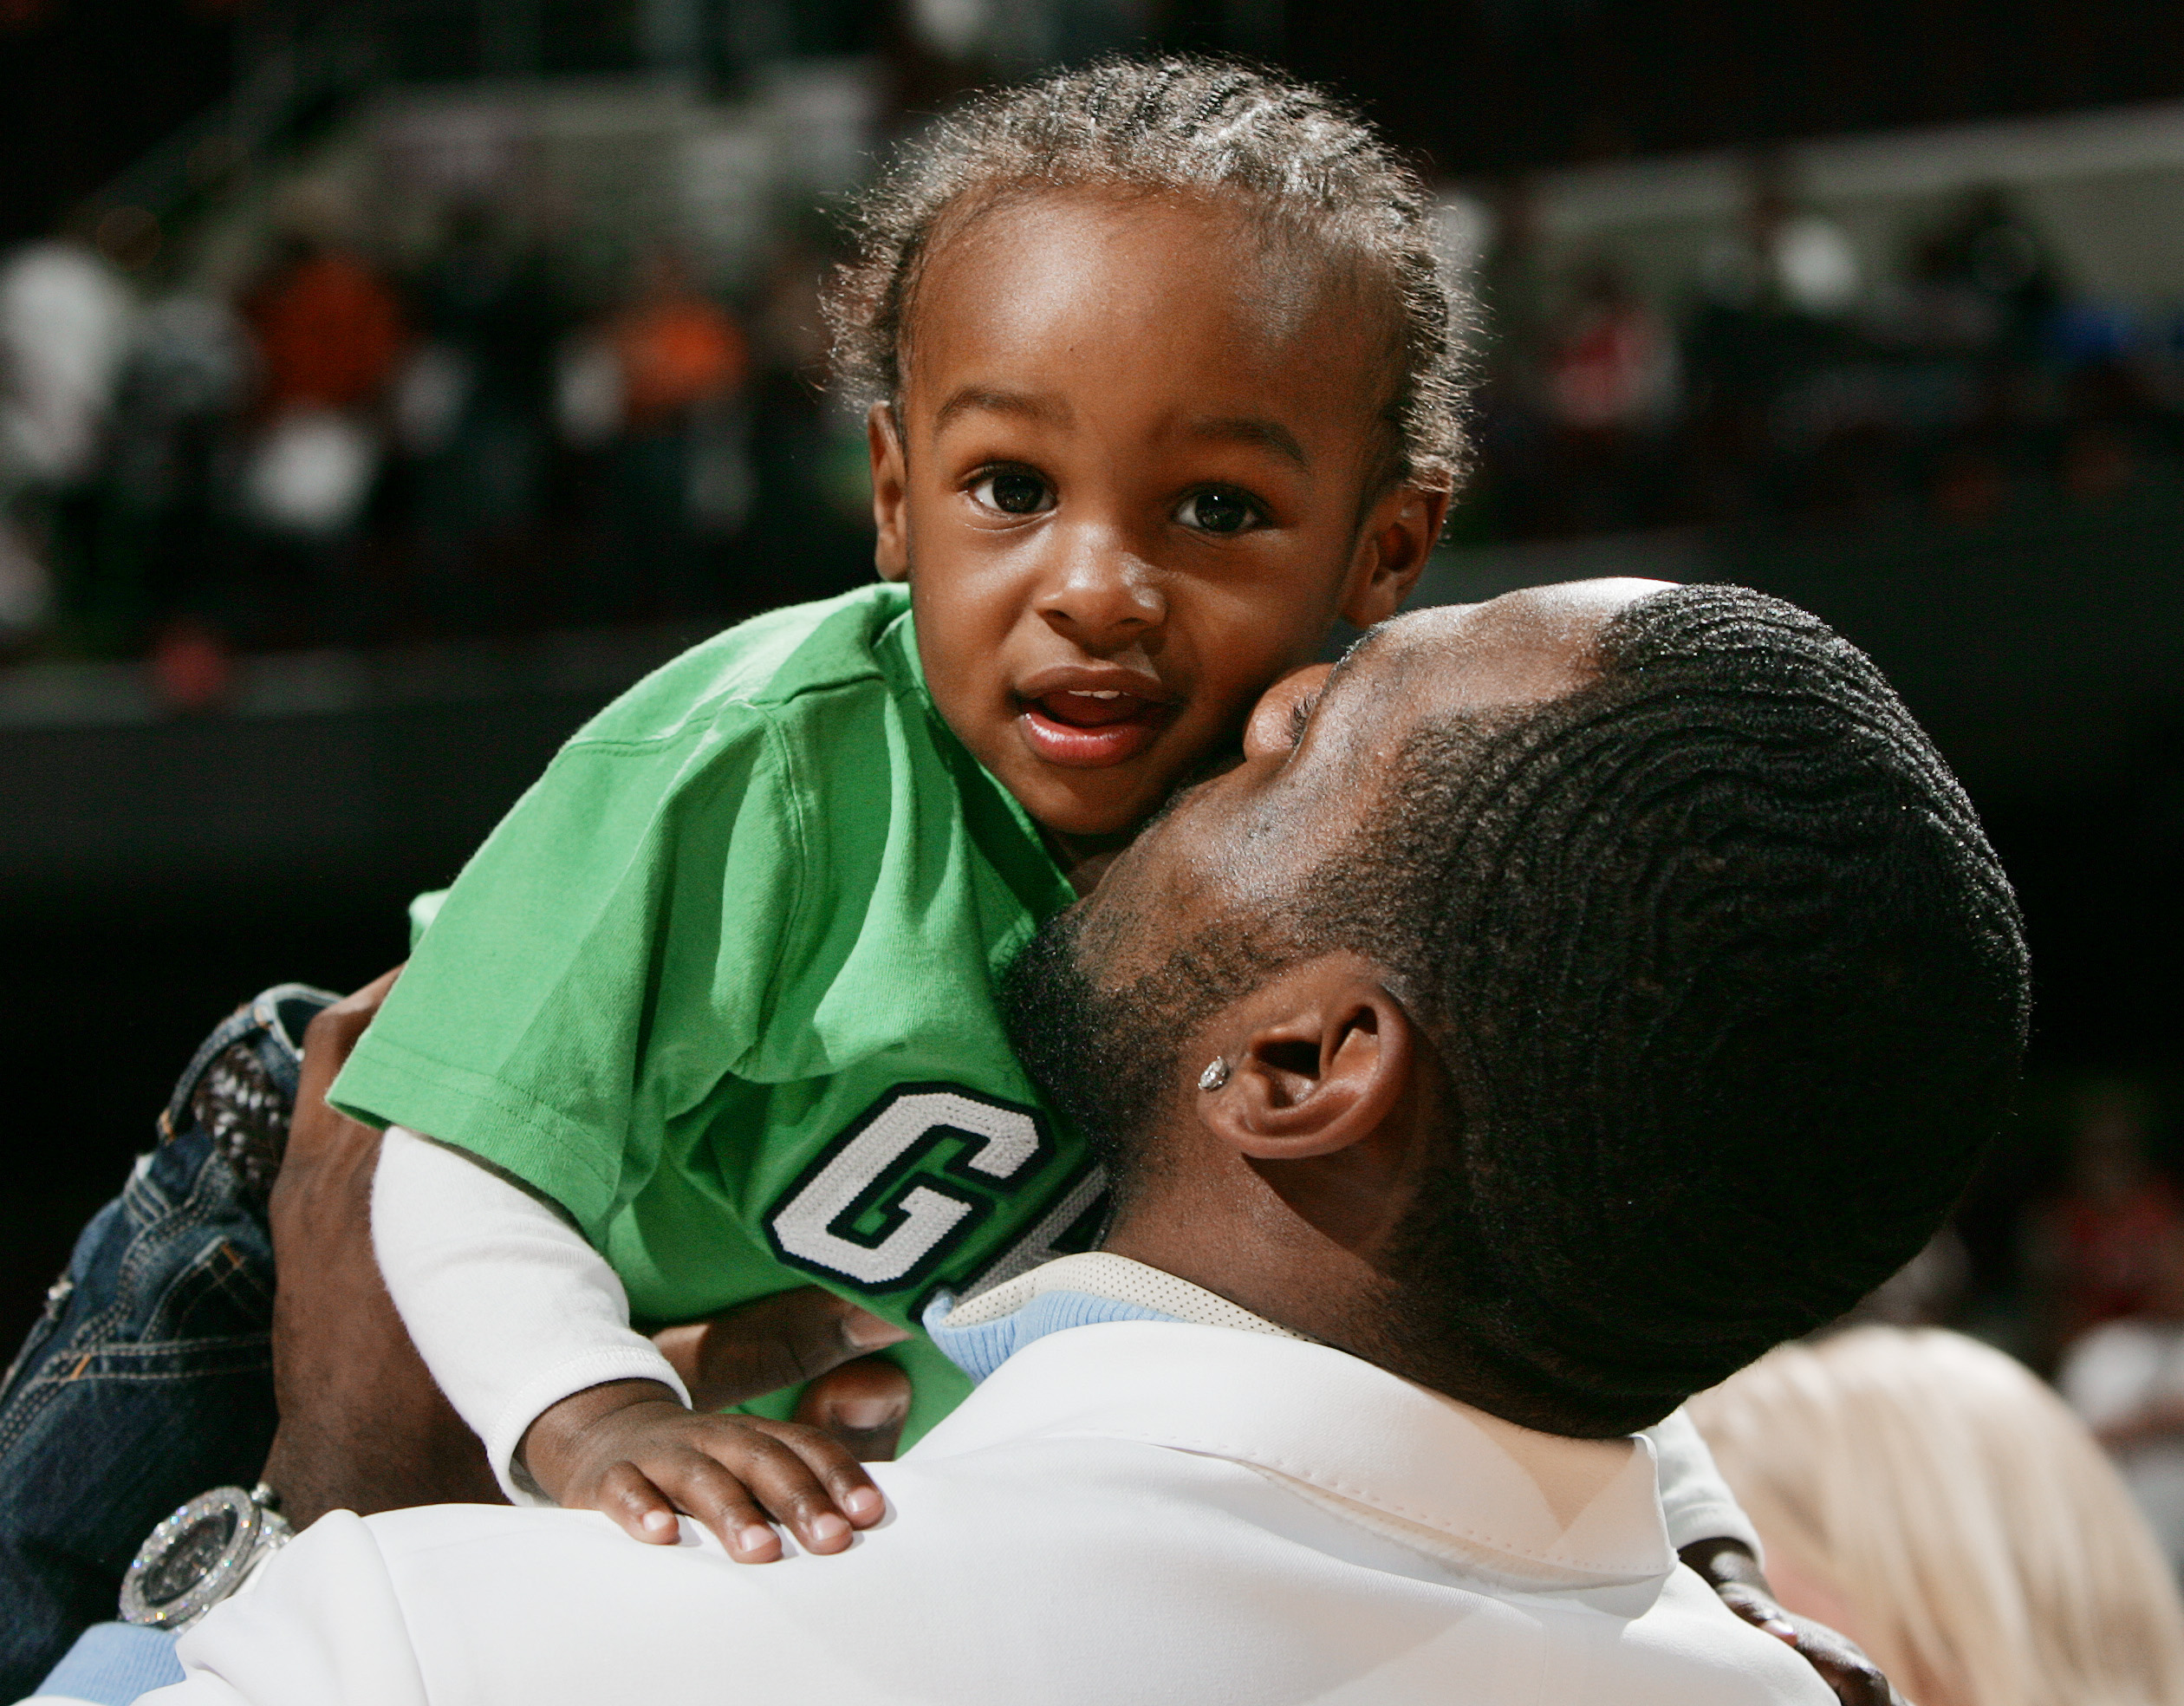 Cleveland Cavaliers LeBron James gives a kiss to his son LeBron James Jr. after their victory against the Atlanta Hawks April 19, 2006 at Quicken Loans Arena in Cleveland.  (John Kuntz/The Plain Dealer)